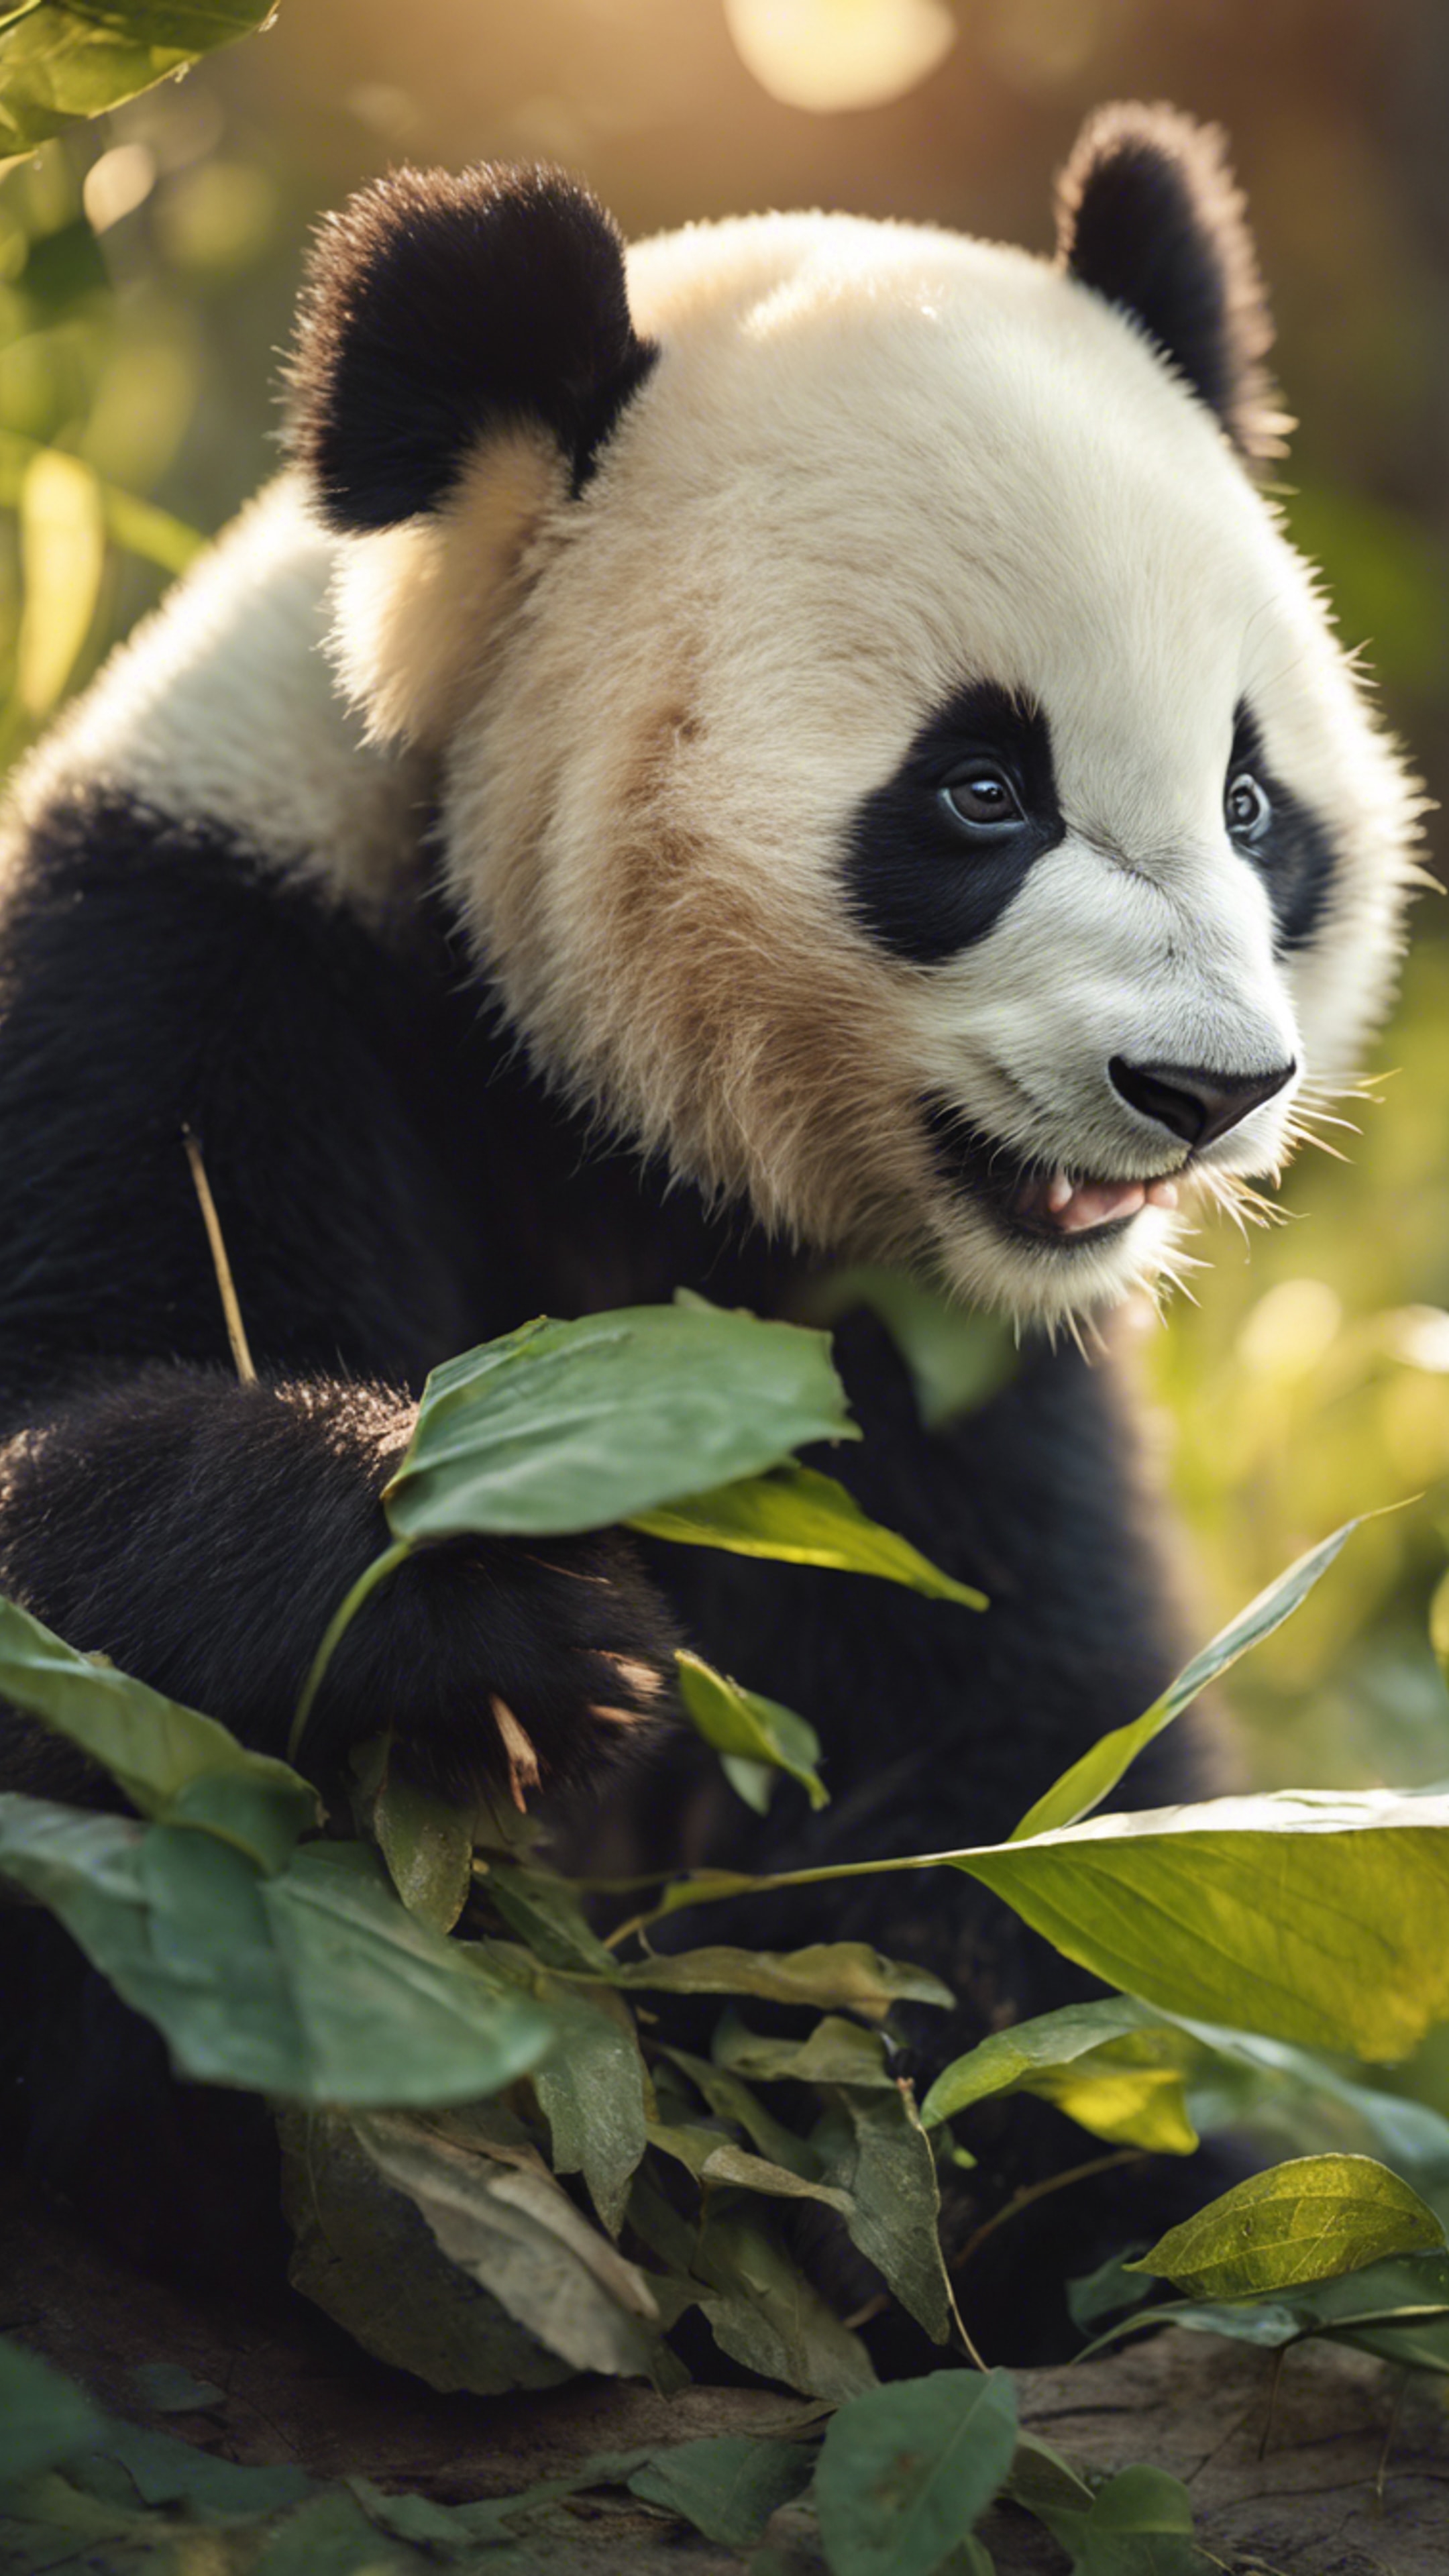 A young panda bear adorably nibbling on a leaf in the soft glow of morning light.壁紙[df98dc8ca776441d85bc]